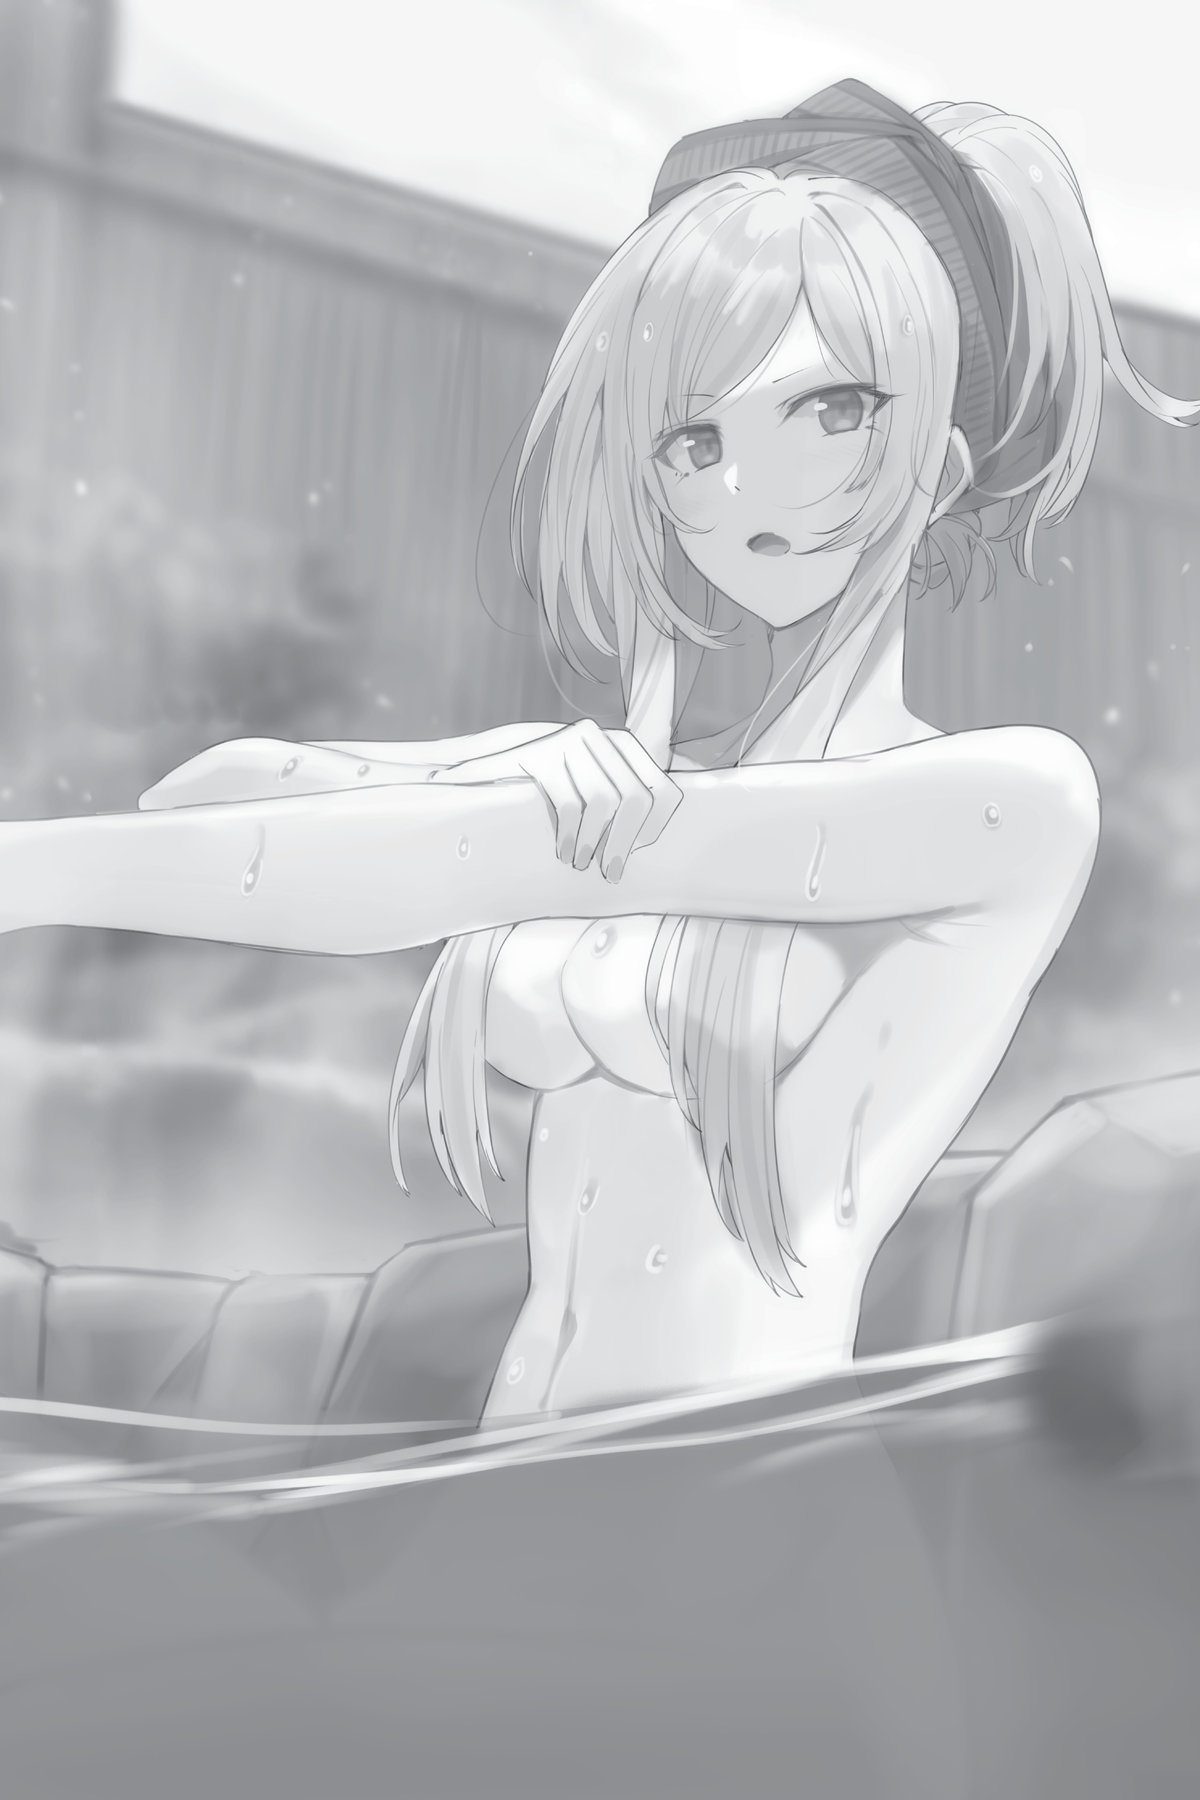 Cid joins Alexia in hot spring #eminenceintheshadow #theeminenceinthe